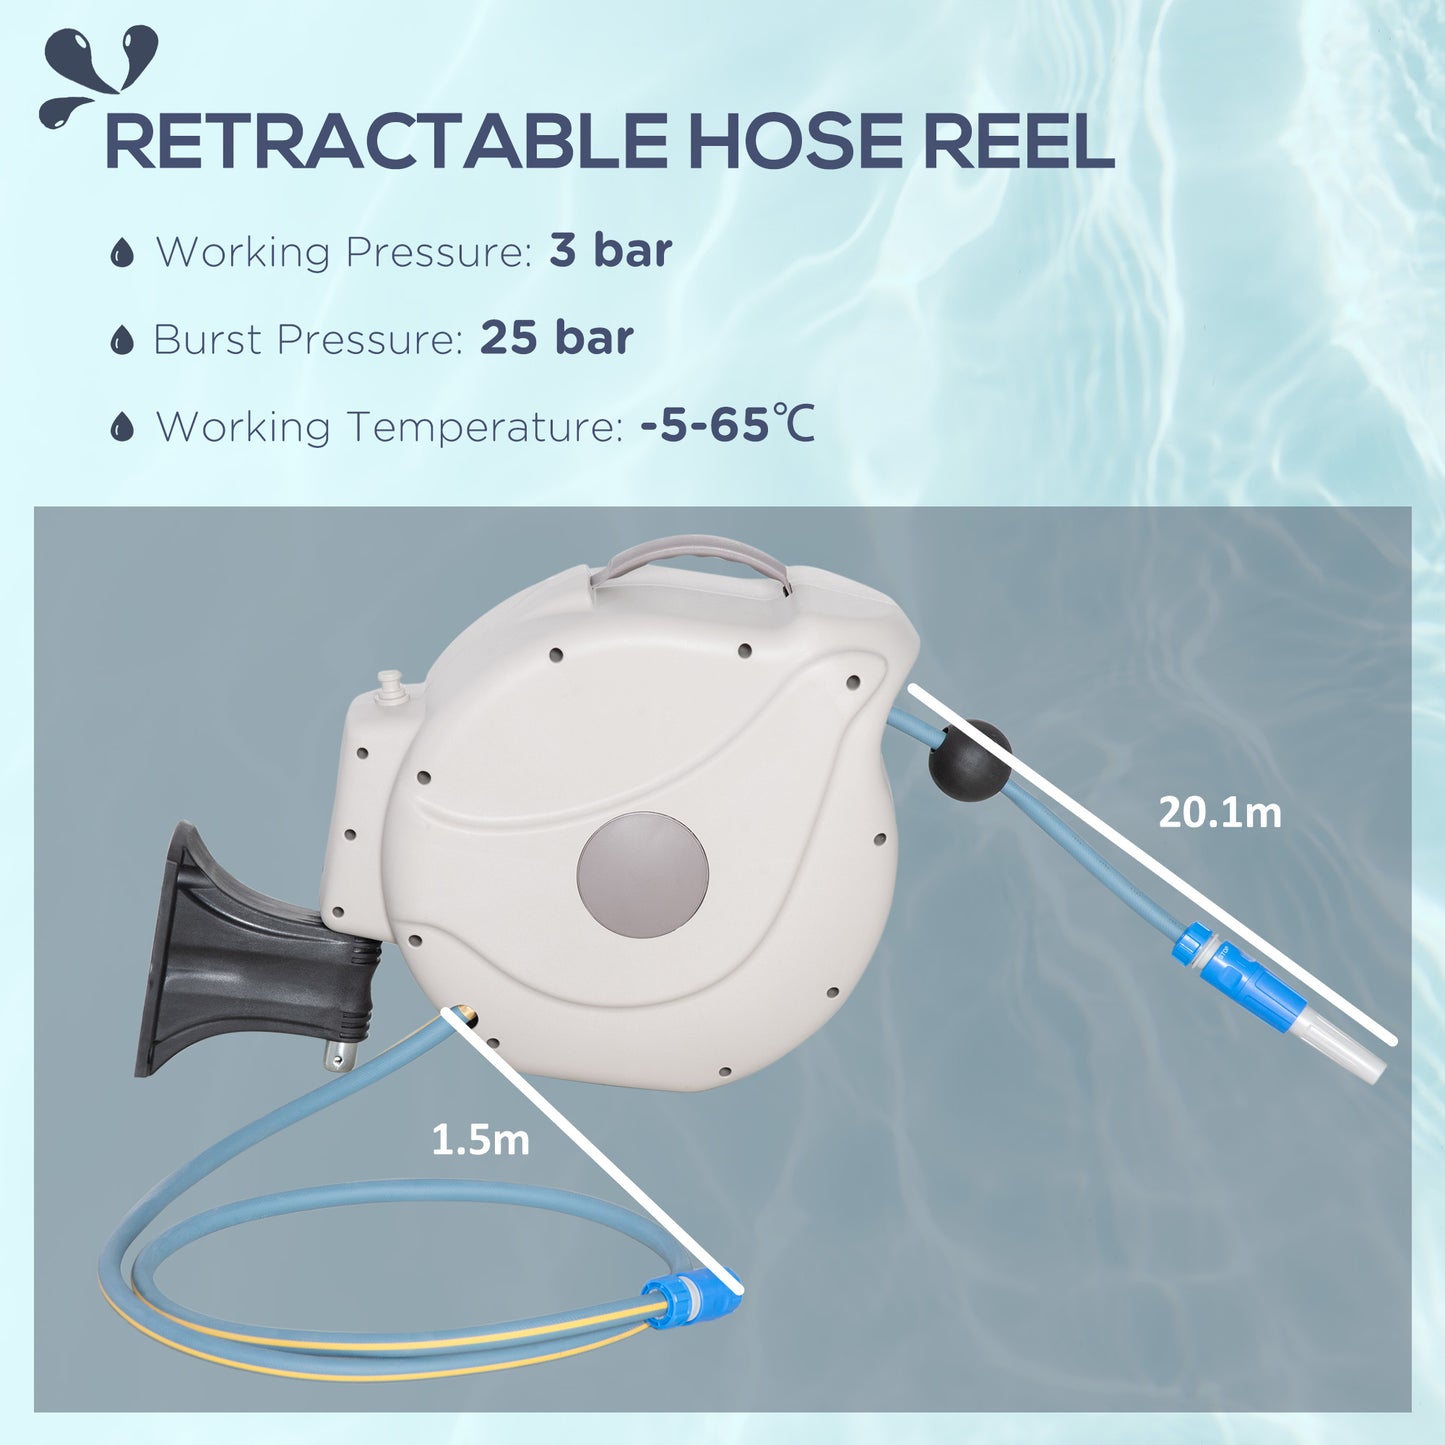 Outsunny Retractable Hose Reel w/ Any Length Lock, Auto Rewind Slow Return System, and 180° Swivel Wall Mounted Bracket, 20m+1.5m